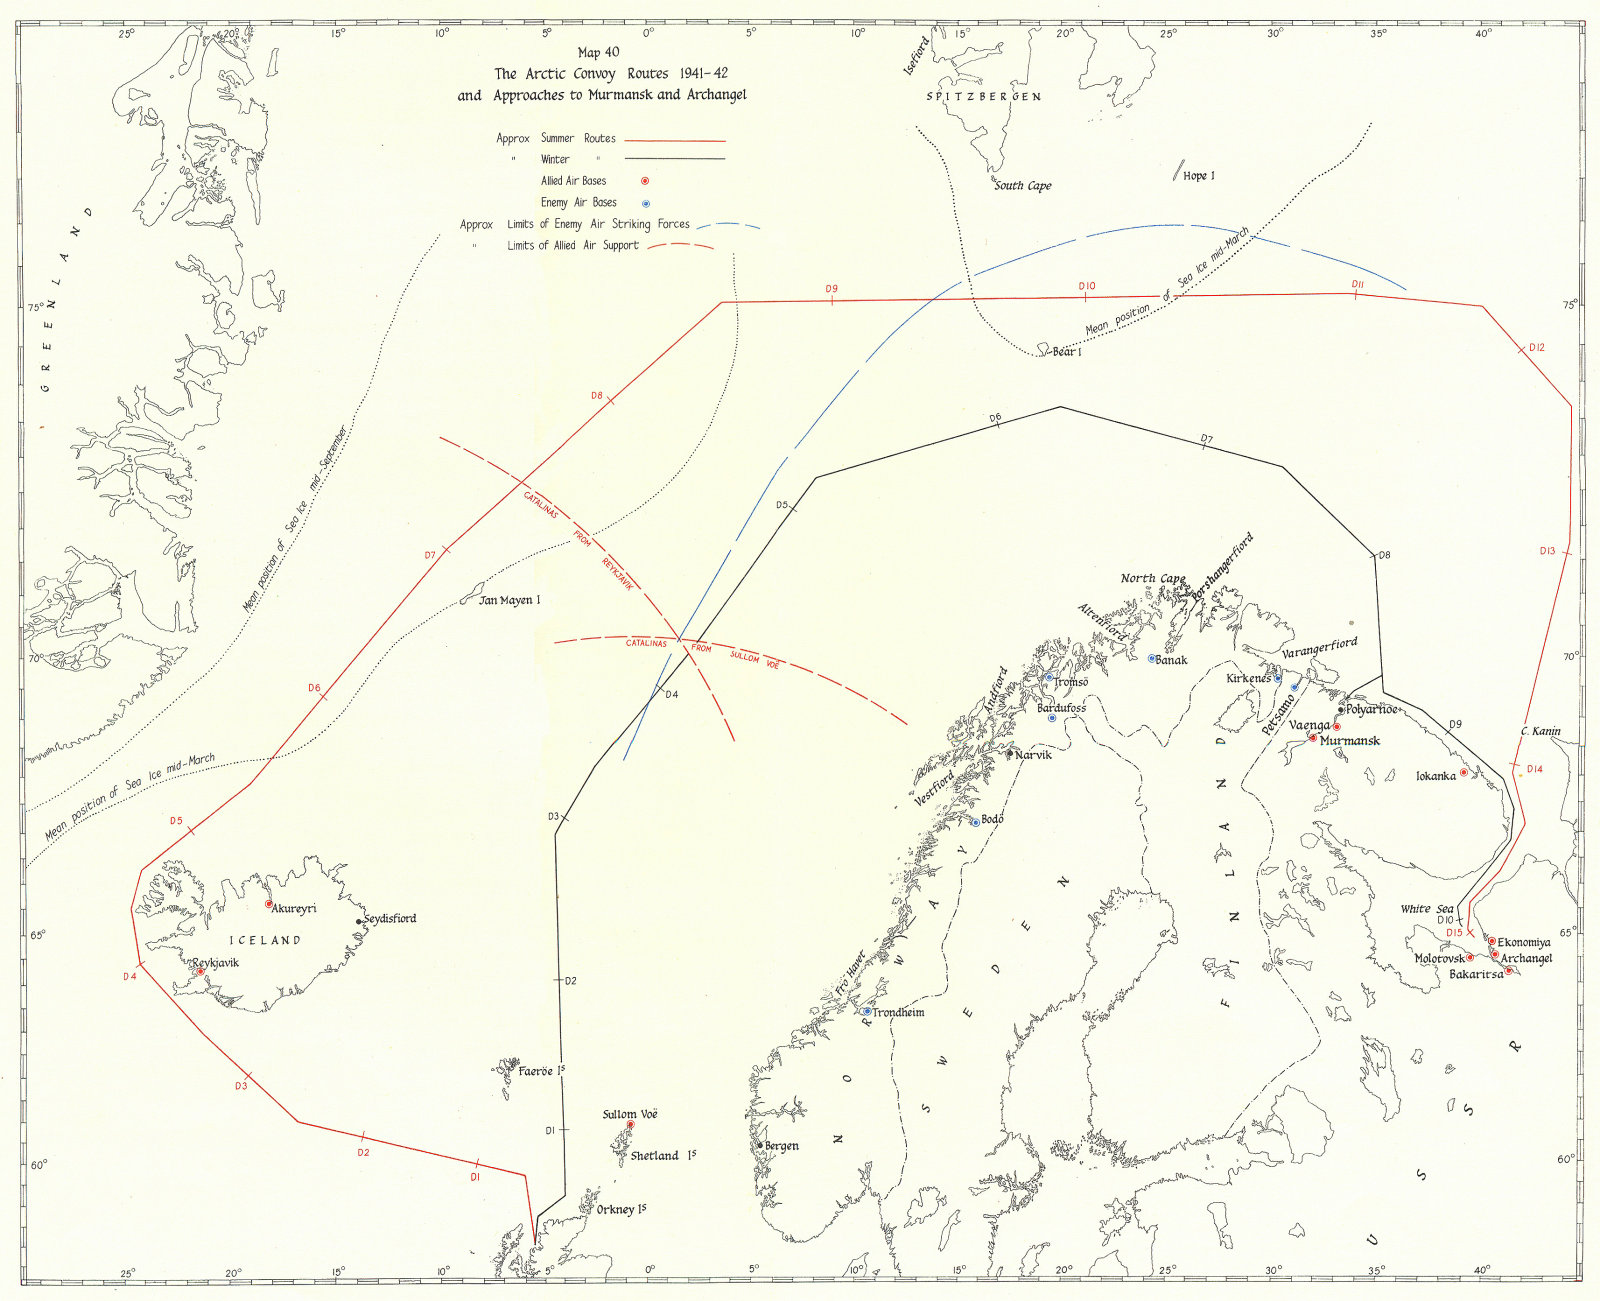 Associate Product ARCTIC CONVOY ROUTES. 1941-42 & Approaches to Murmansk & Archangel 1954 map